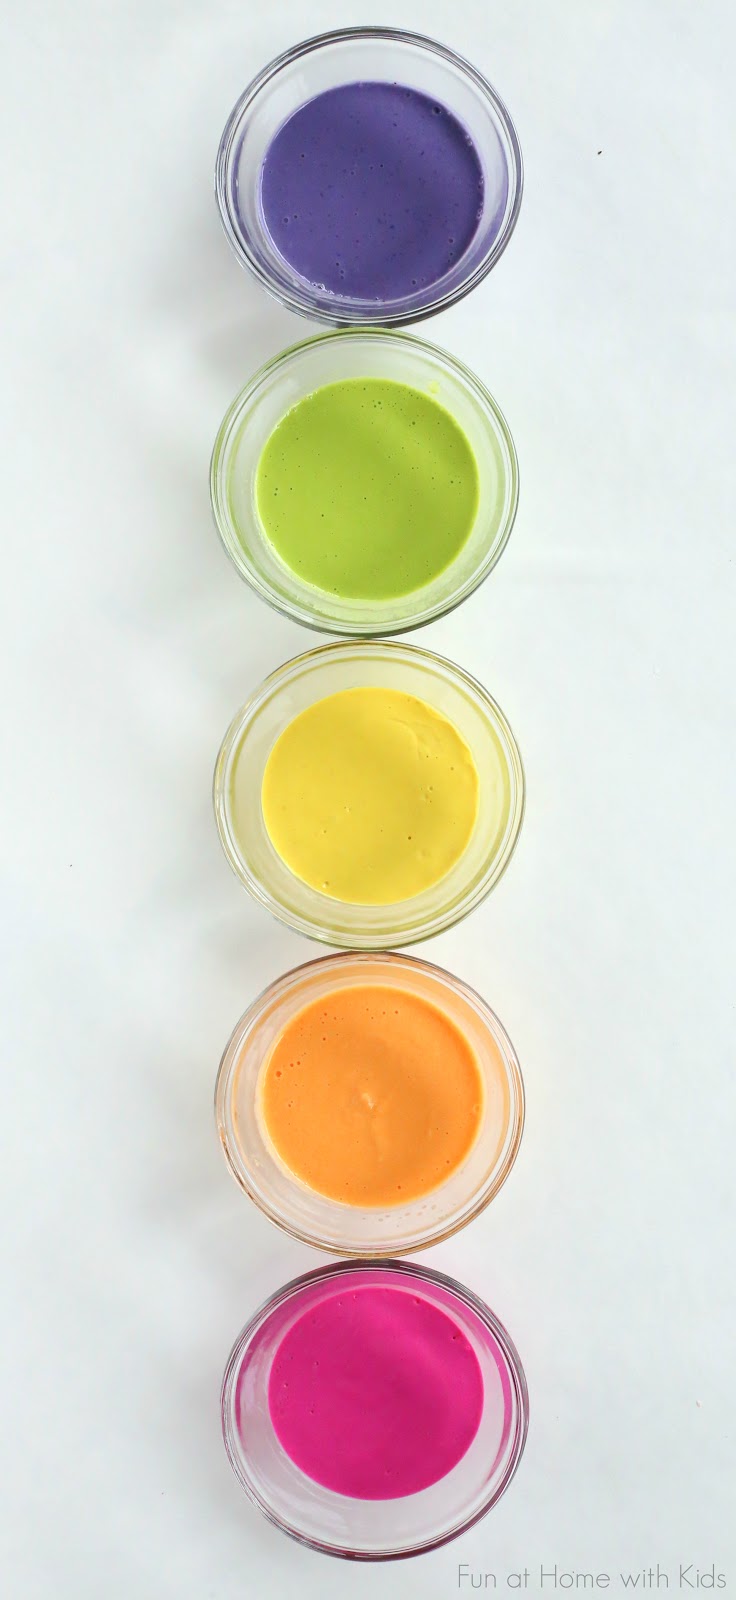 Super easy no-cook naturally dyed fingerpaints for babies or toddlers - and it's taste-safe!  From Fun at Home with Kids